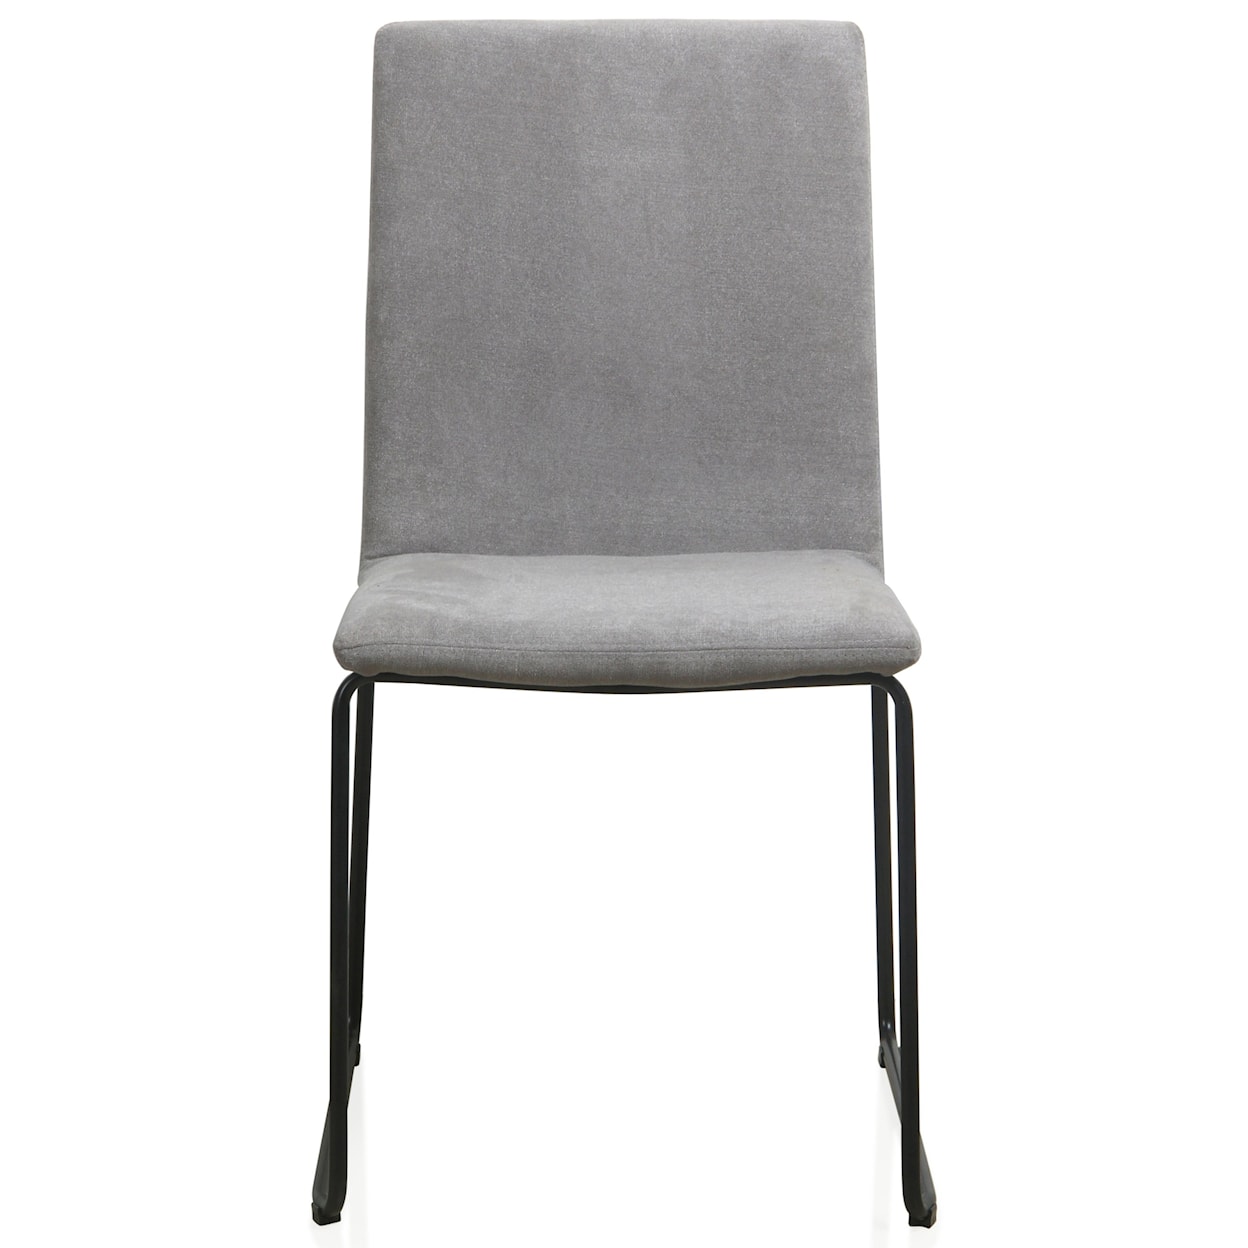 Modus International Crossroads Baird Upholstered Sled Base Dining Chair in